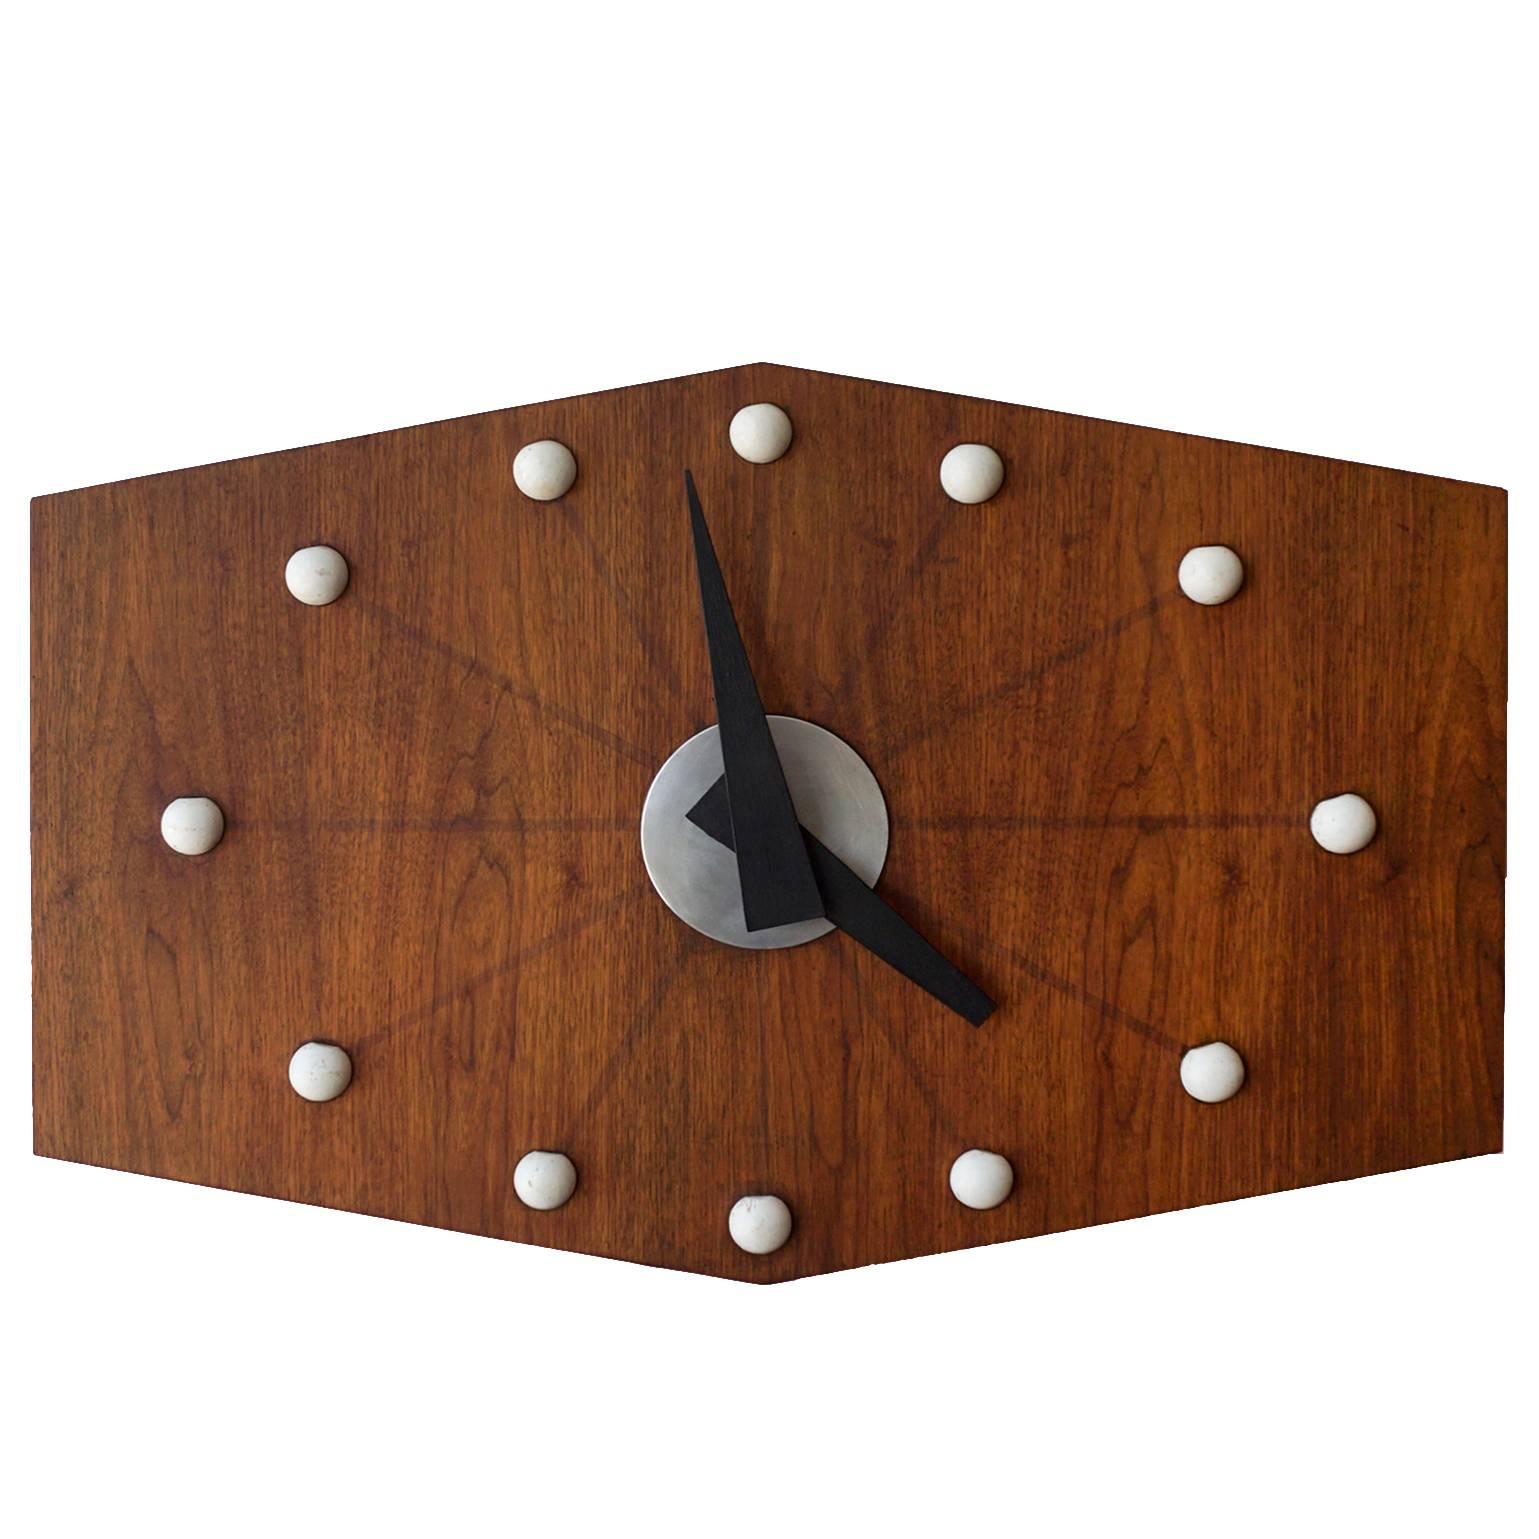 Large-Scale 1950s Wall Clock